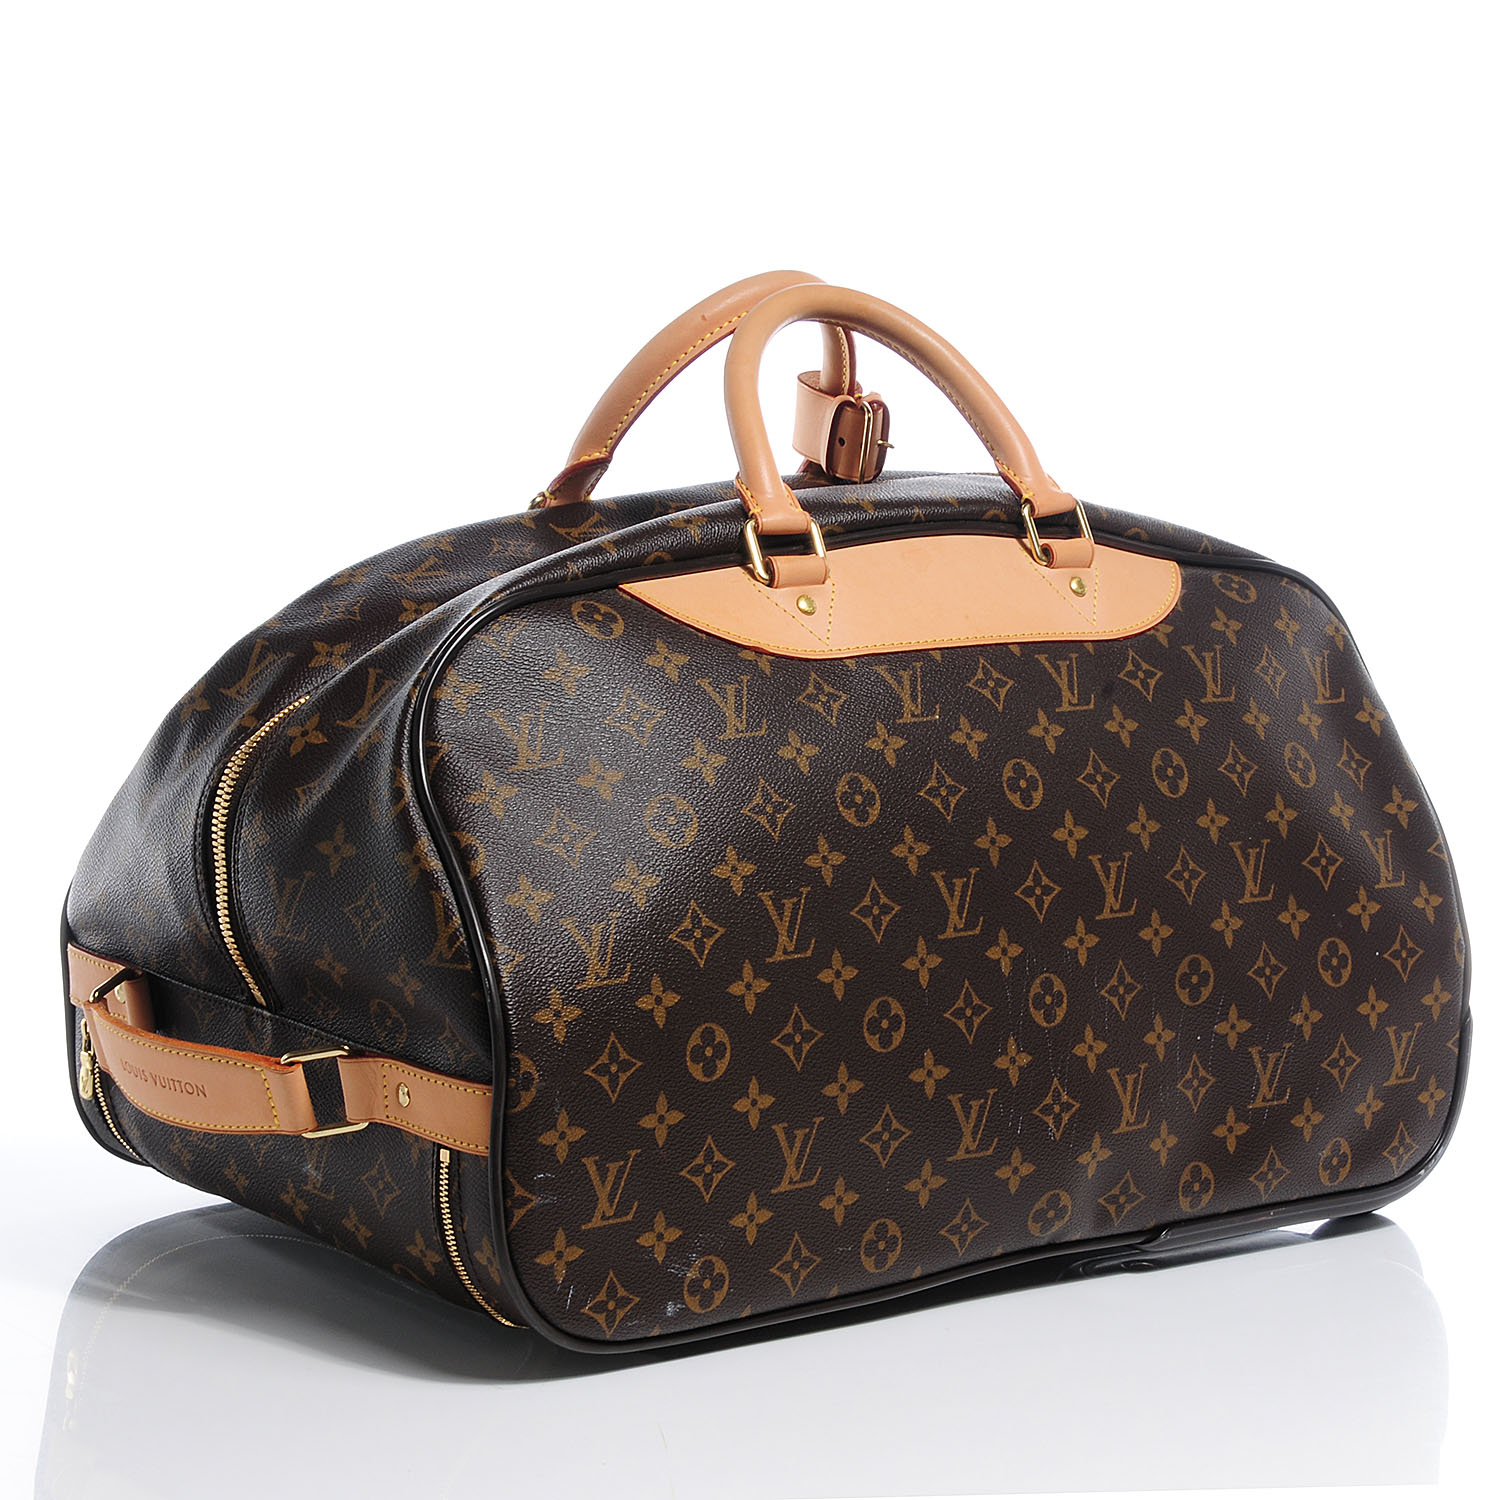 LOUIS VUITTON Monogram Eole 50 Rolling Carry-On Luggage 64200